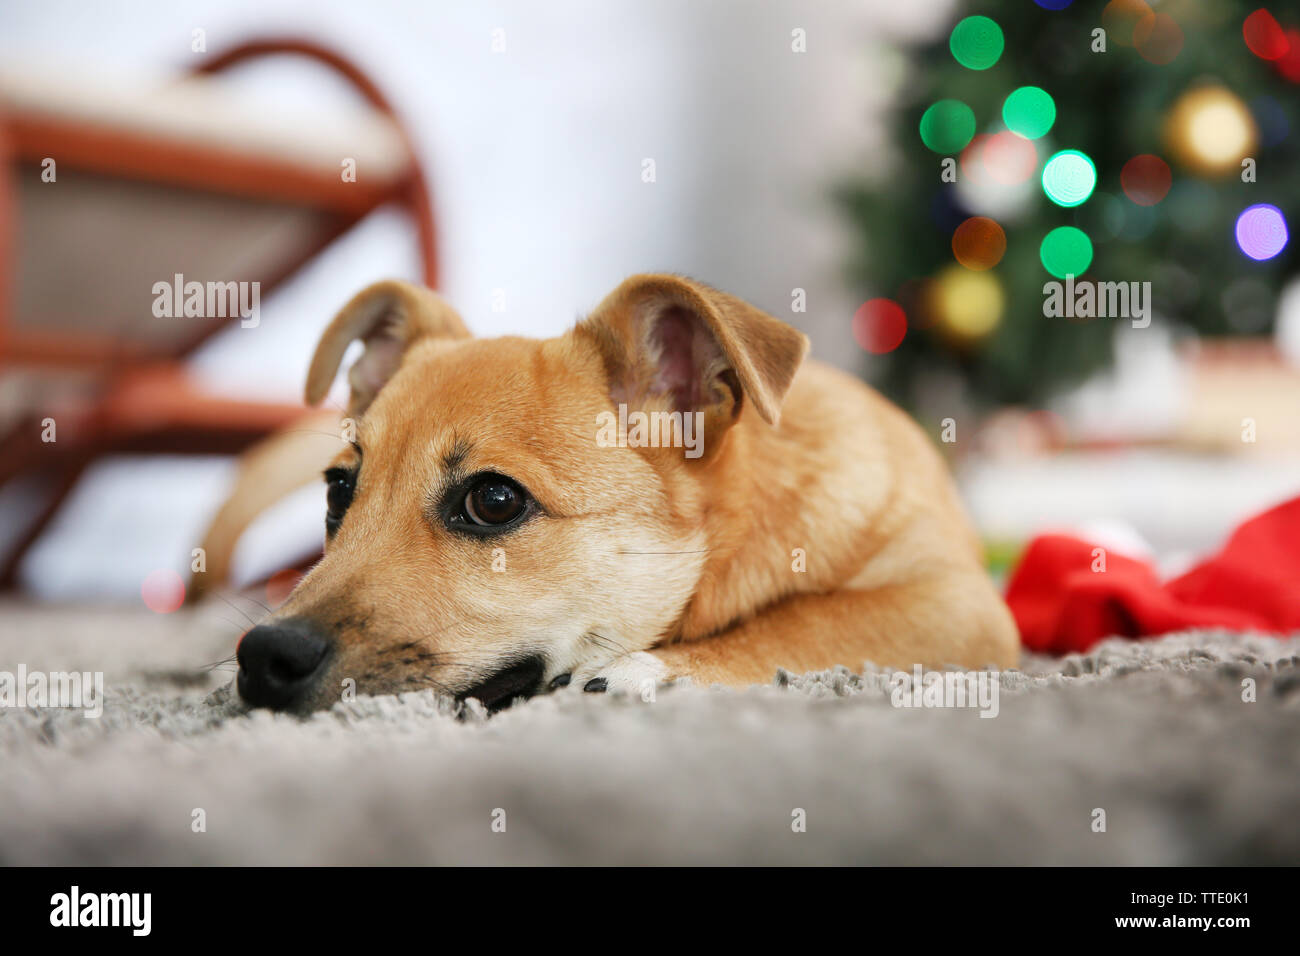 Small cute funny dog laying at carpet with Santa hat on Christmas tree background Stock Photo